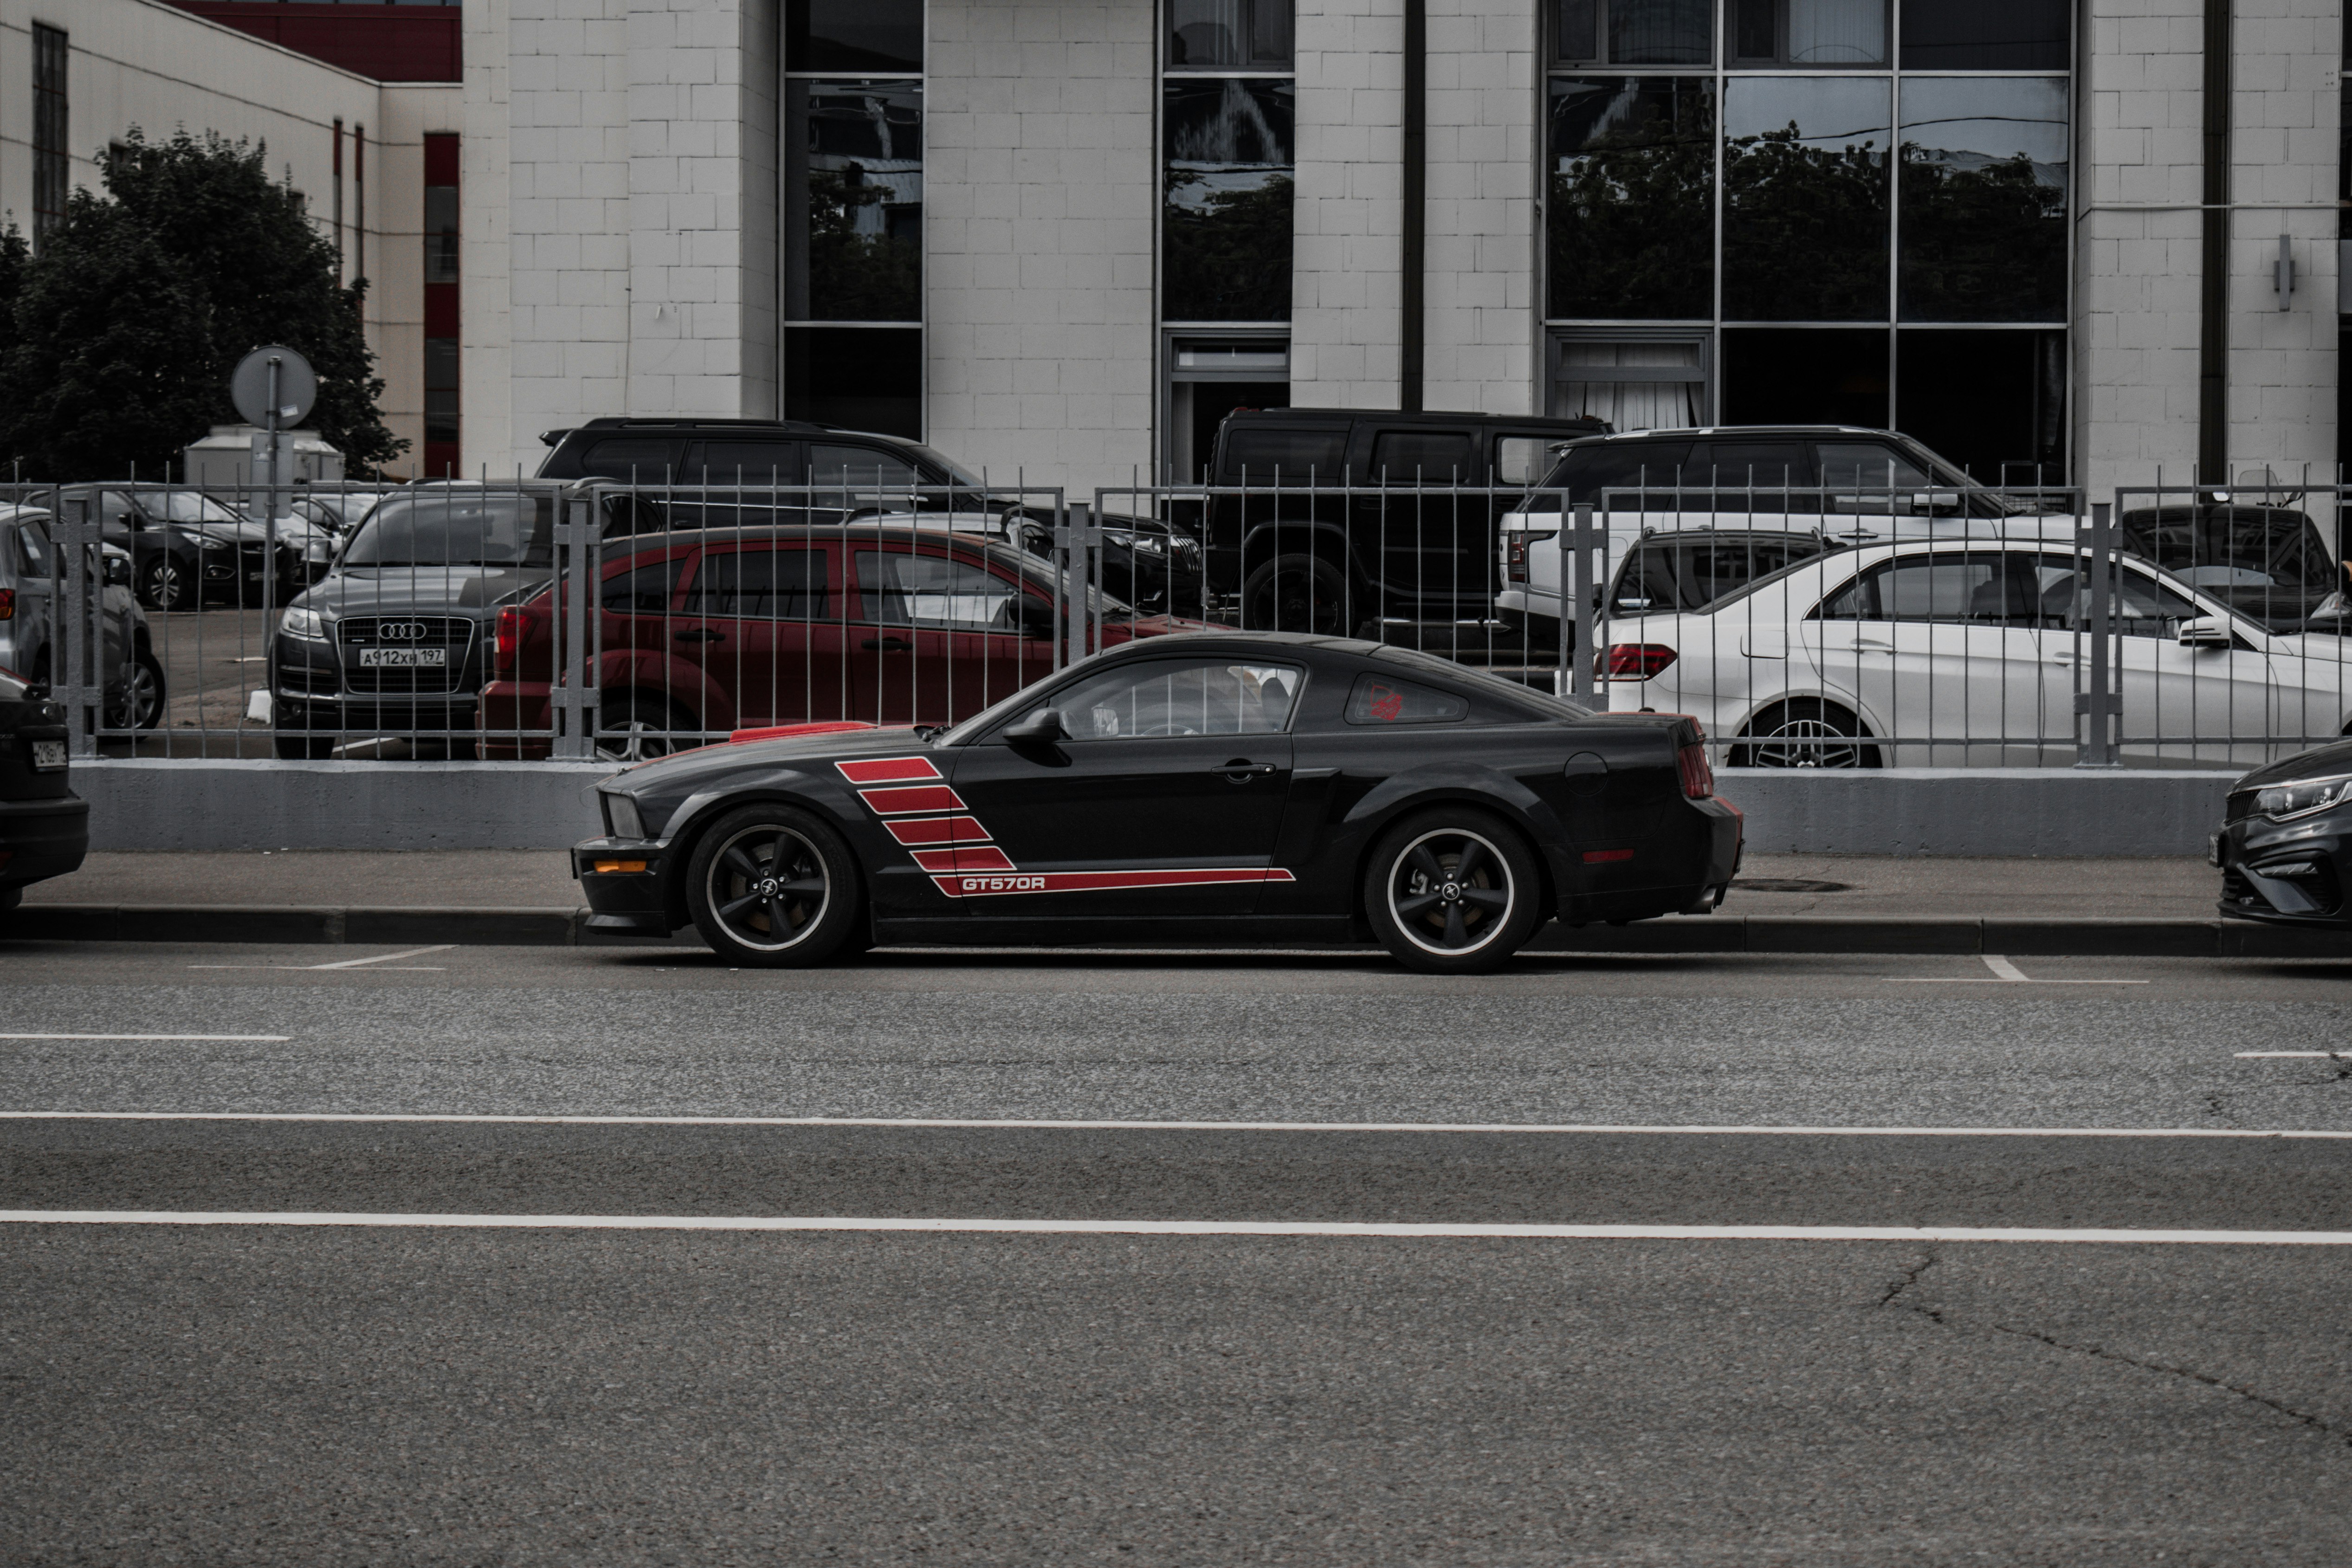 black and red porsche 911 parked on road near building during daytime